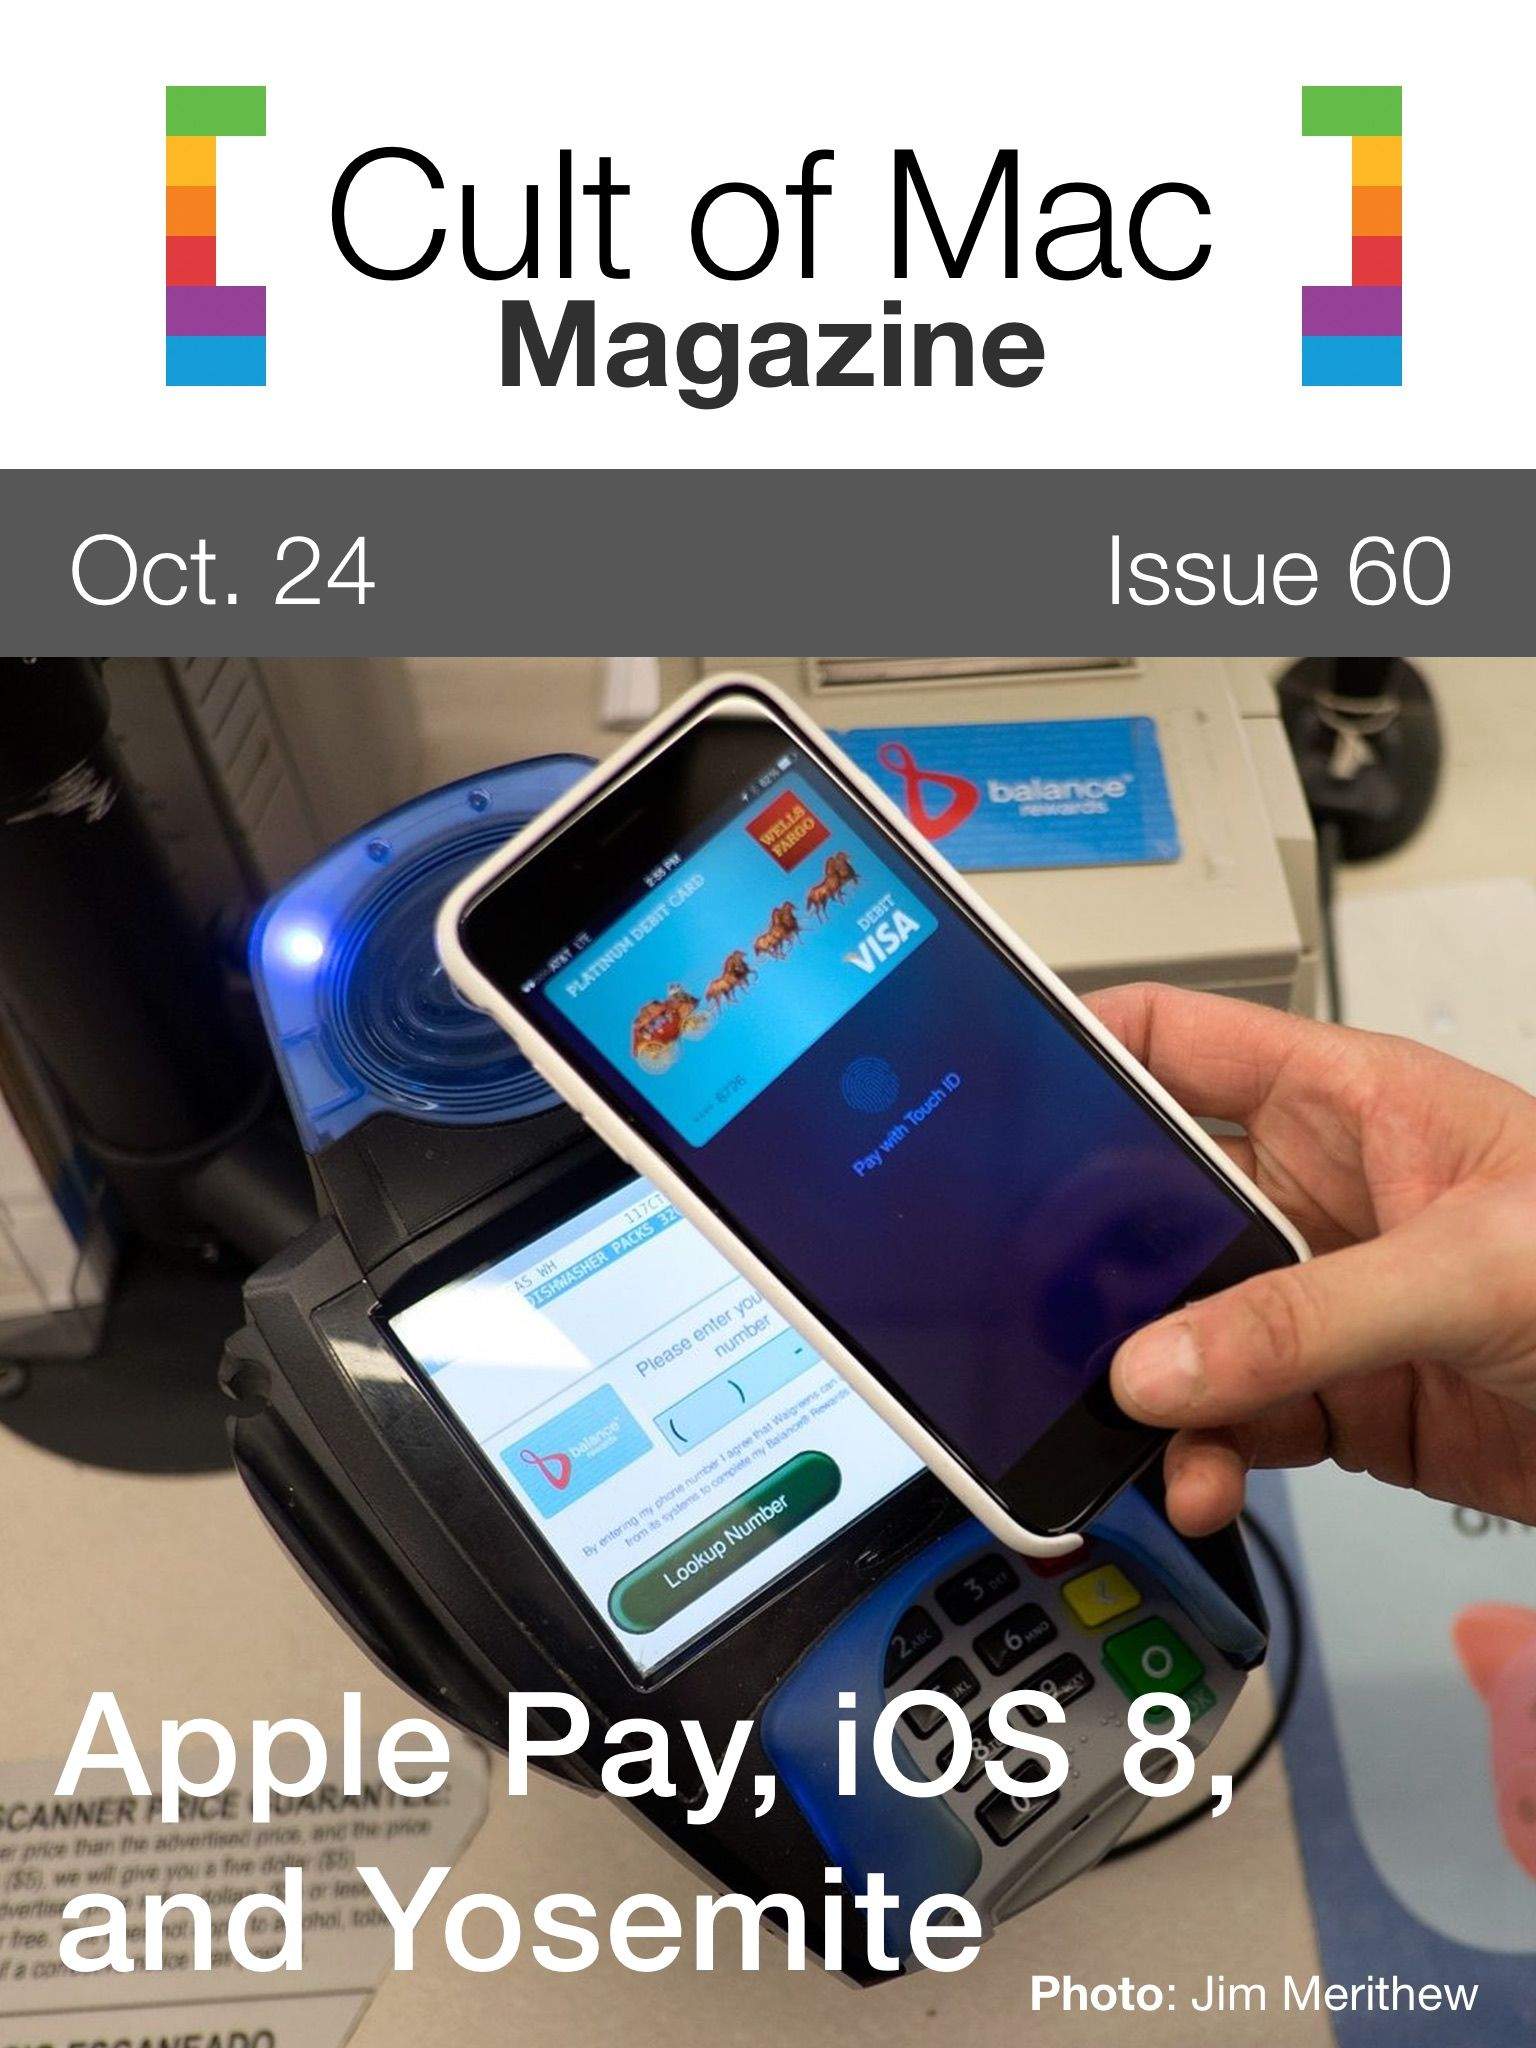 Apple Pay, iOS 8.1, Yosemite, and more! Cover Design: Rob LeFebvre/Cult of Mac